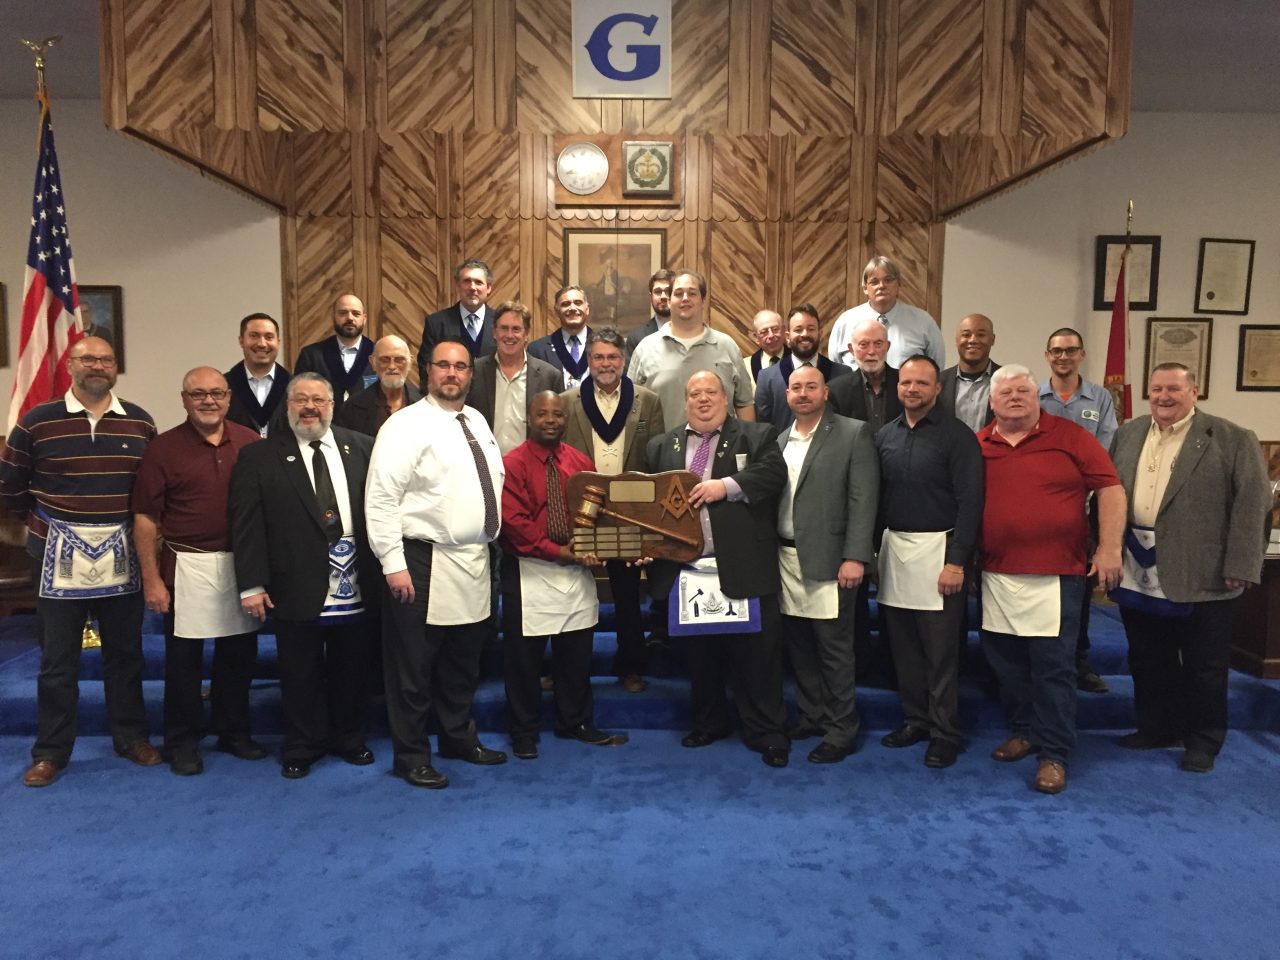 Gavel taken from Eola Lodge by Orlando Lodge 69 on March 19, 2019